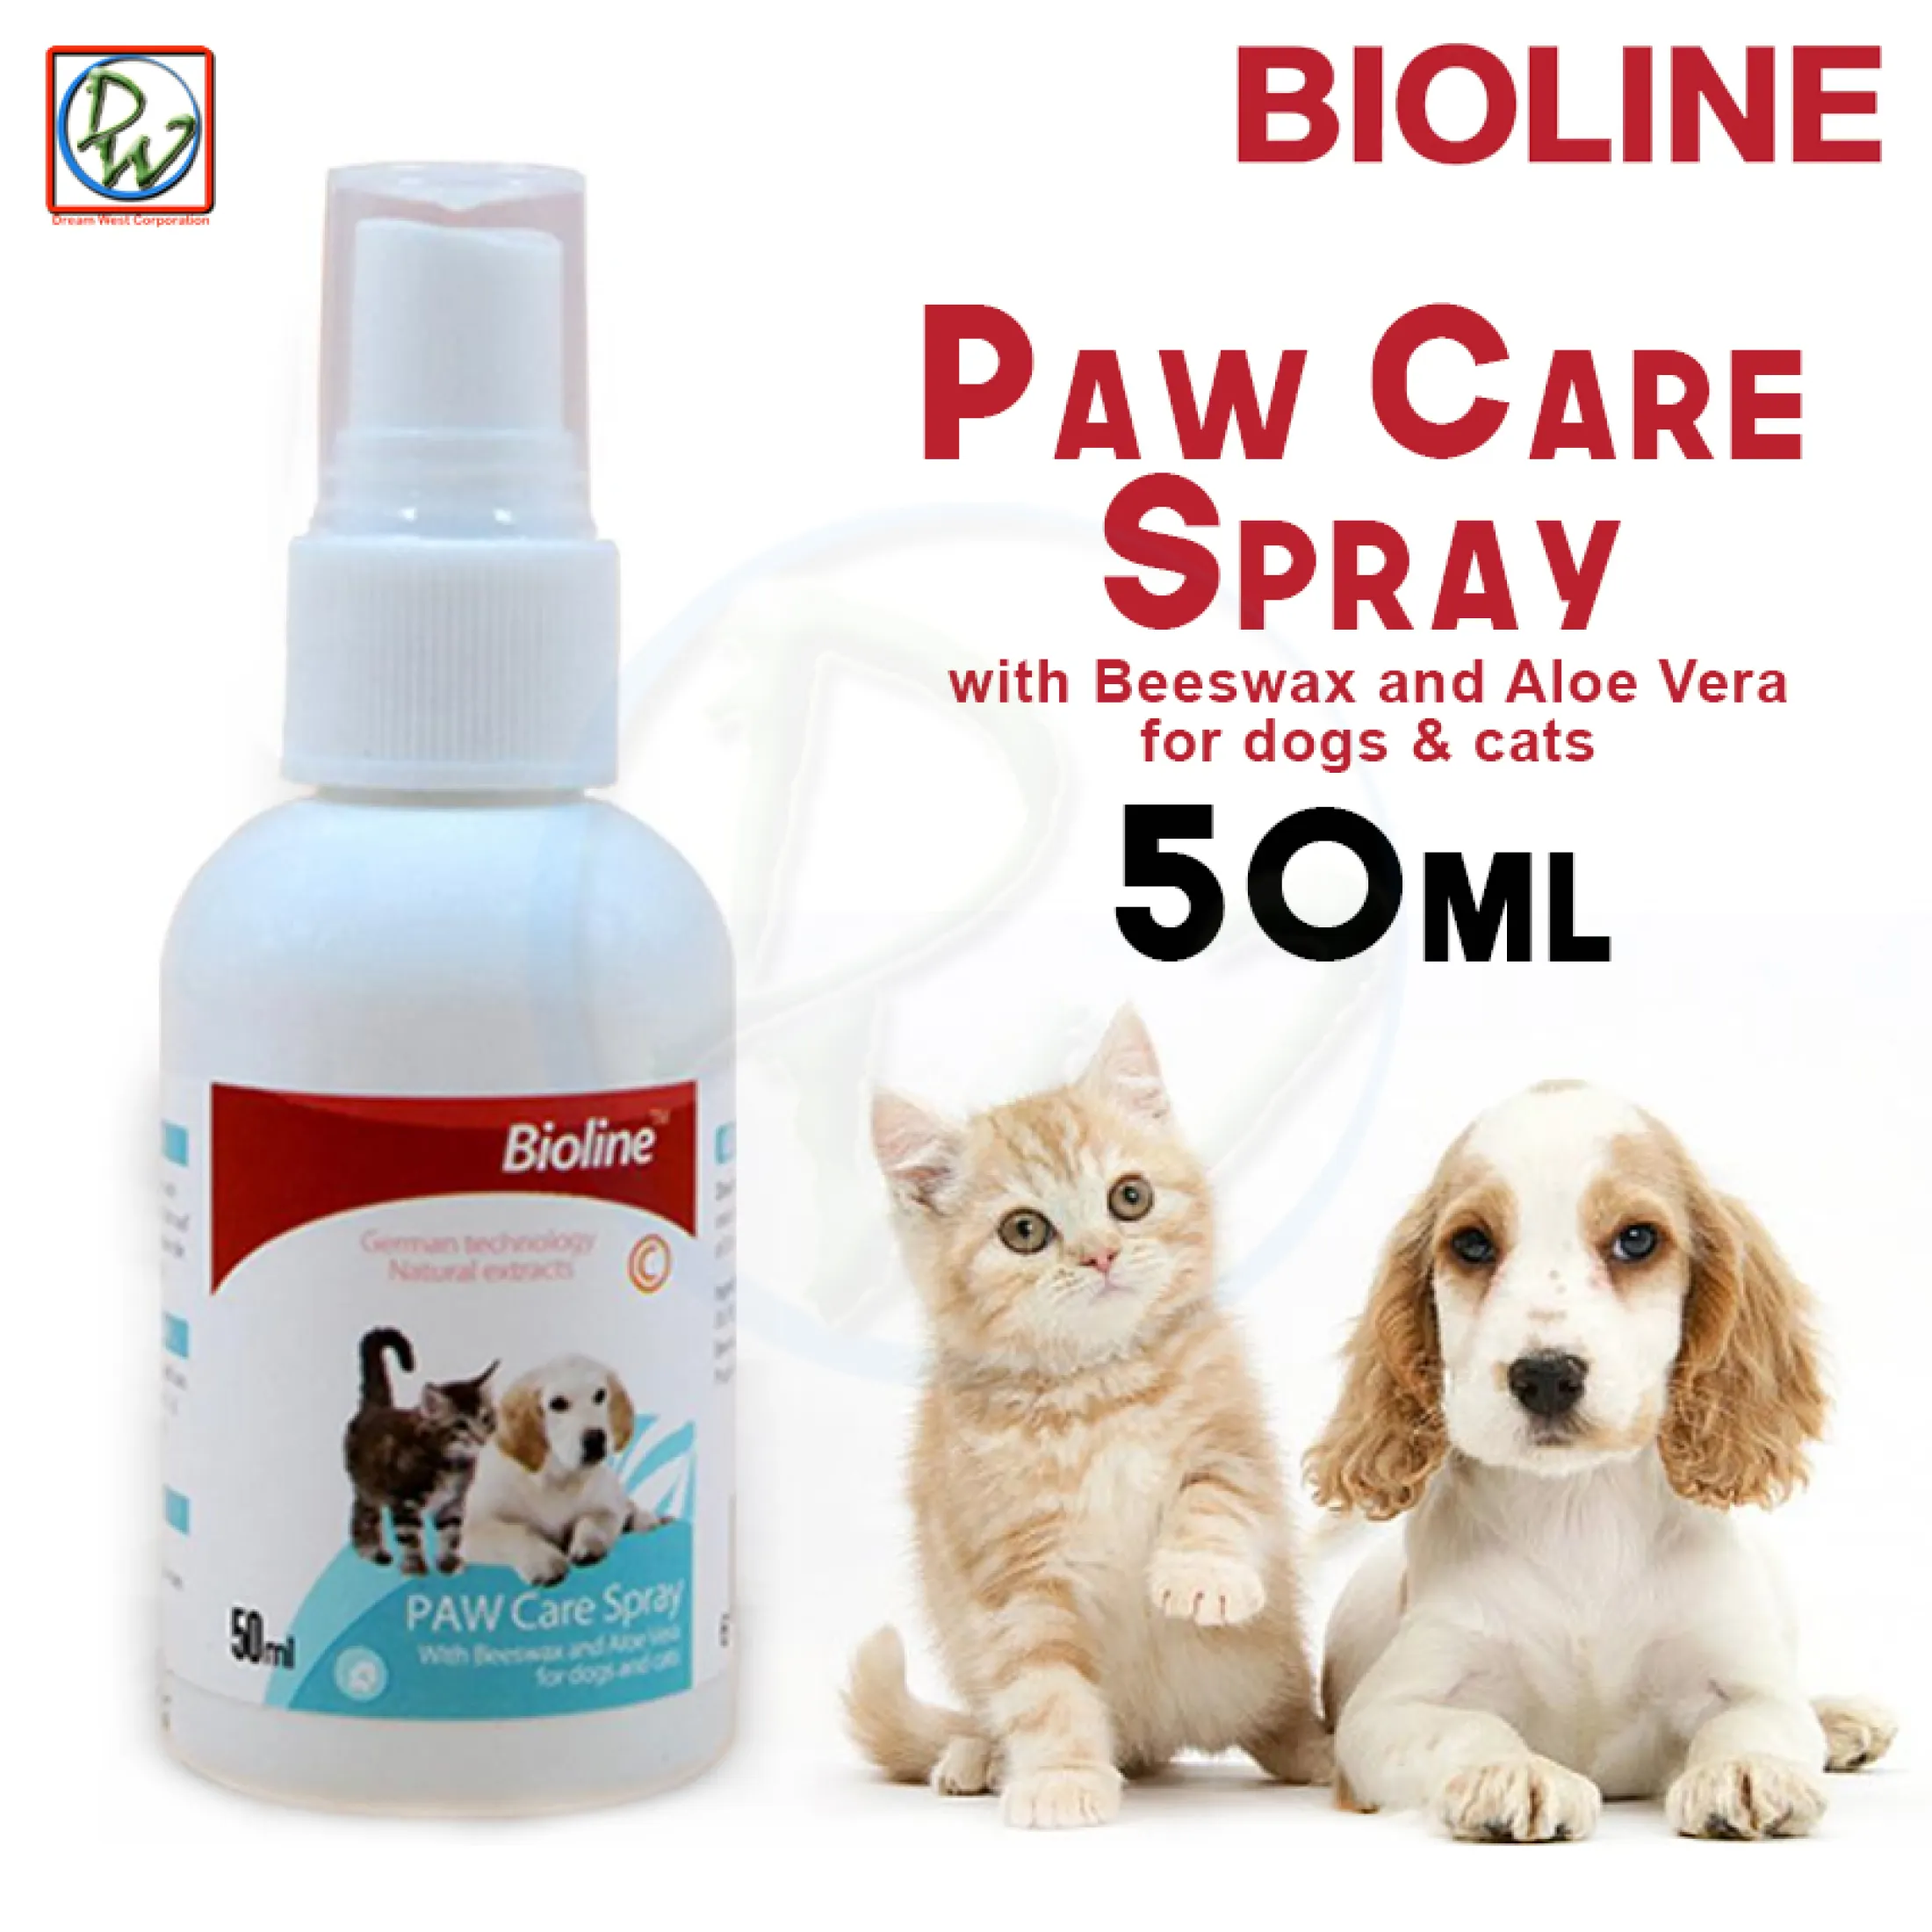 fysisk Rynke panden ujævnheder Bioline Paw Care Spray 50ml With Beeswax and Aloe Vera Anti-bacterial &  Anti-fungal with Beeswax Moisturize & Protect Paws Crack for Dogs & Cats |  Lazada PH